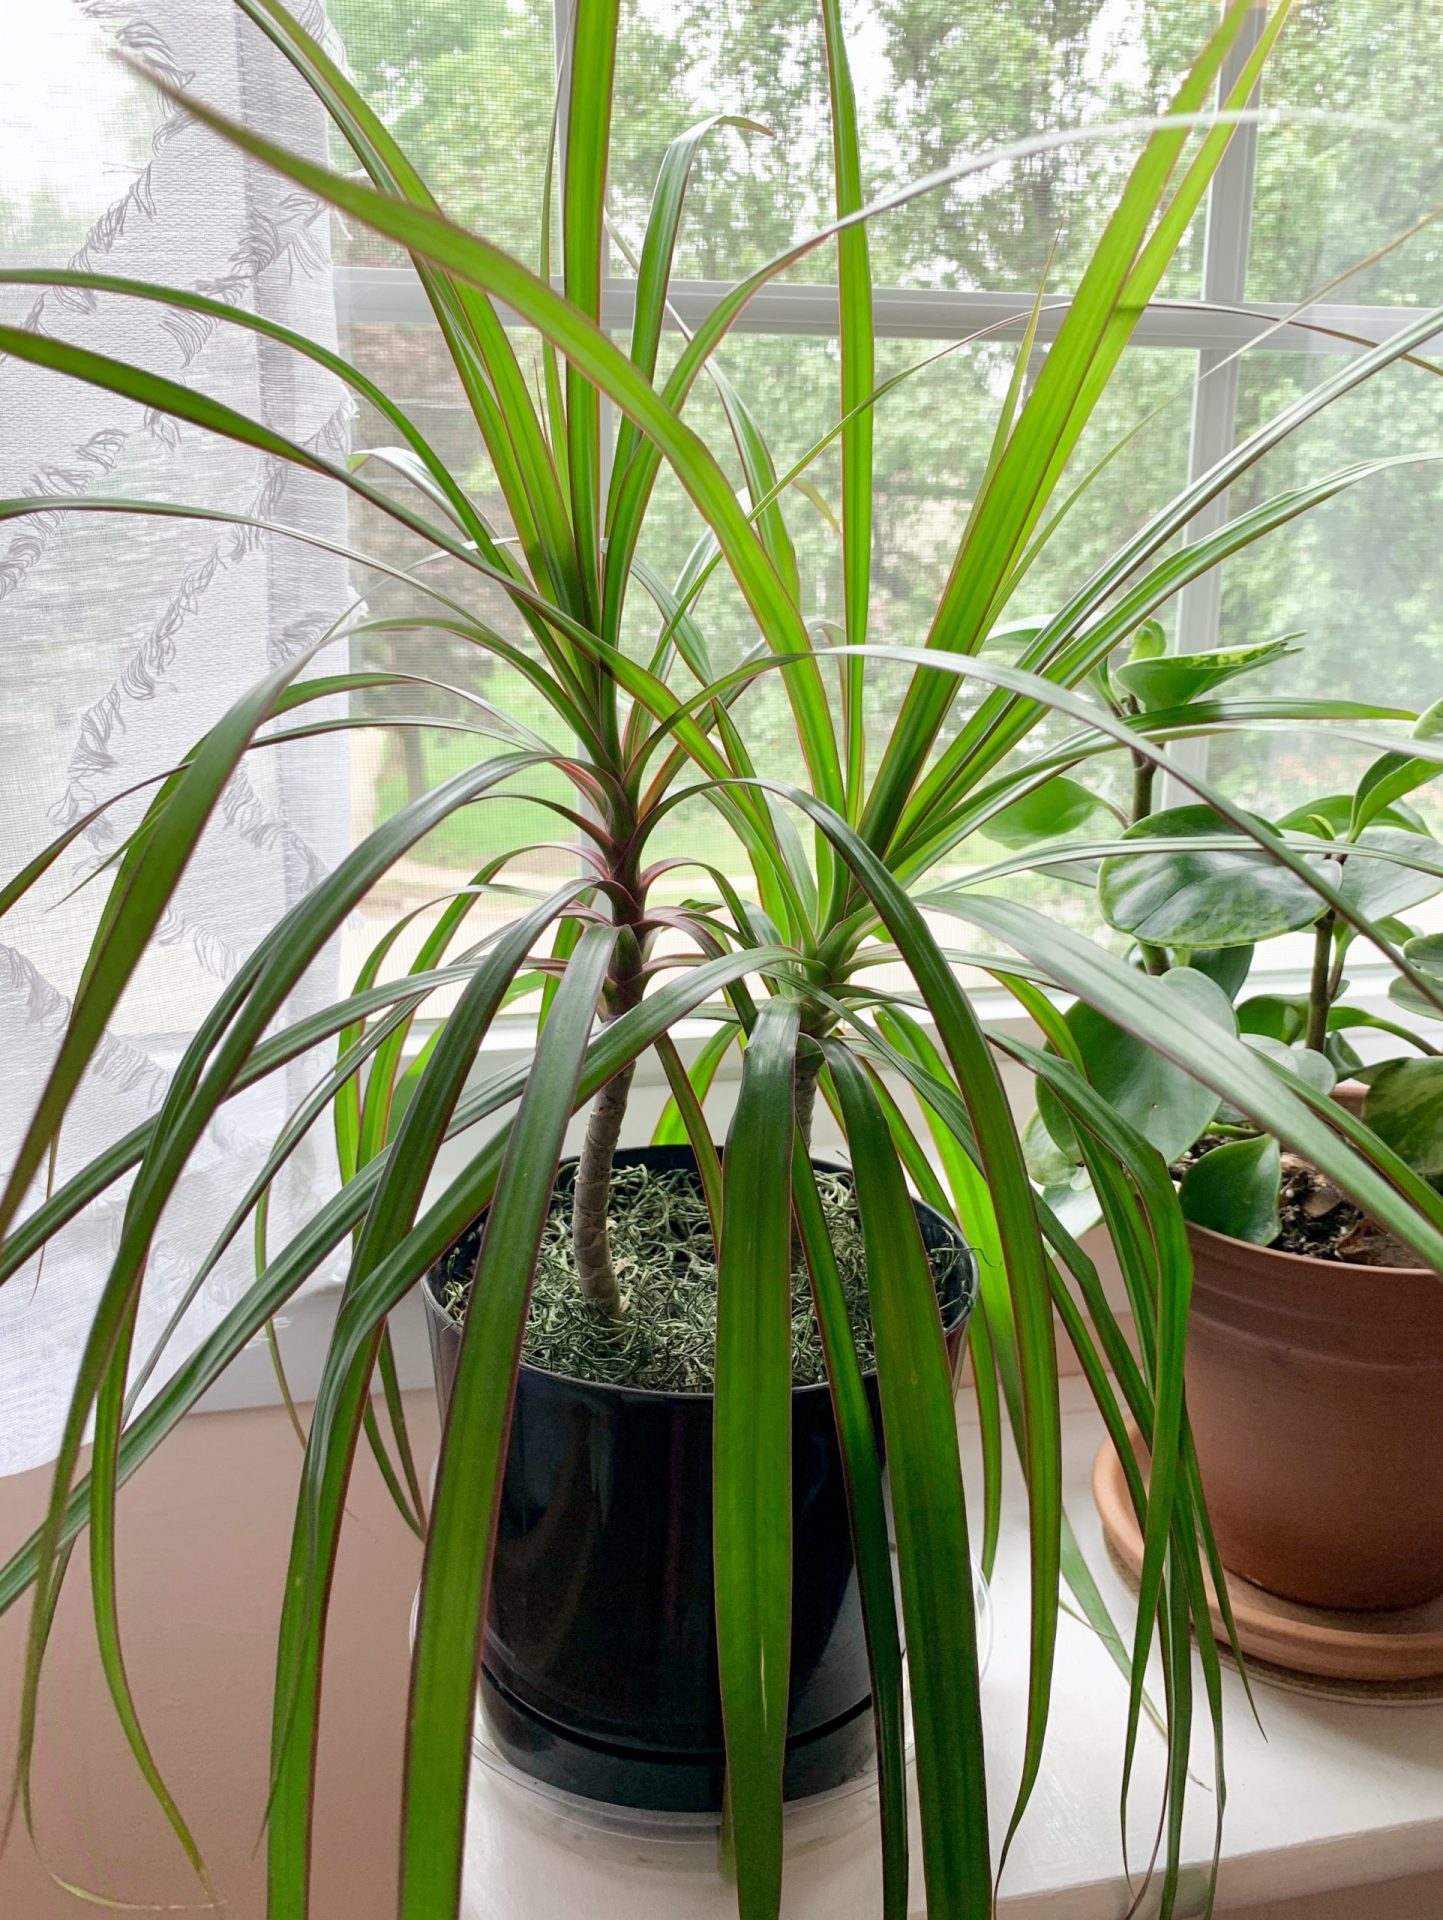 How to Care for and Propagate Dracaena Marginata - Sprouts and Stems